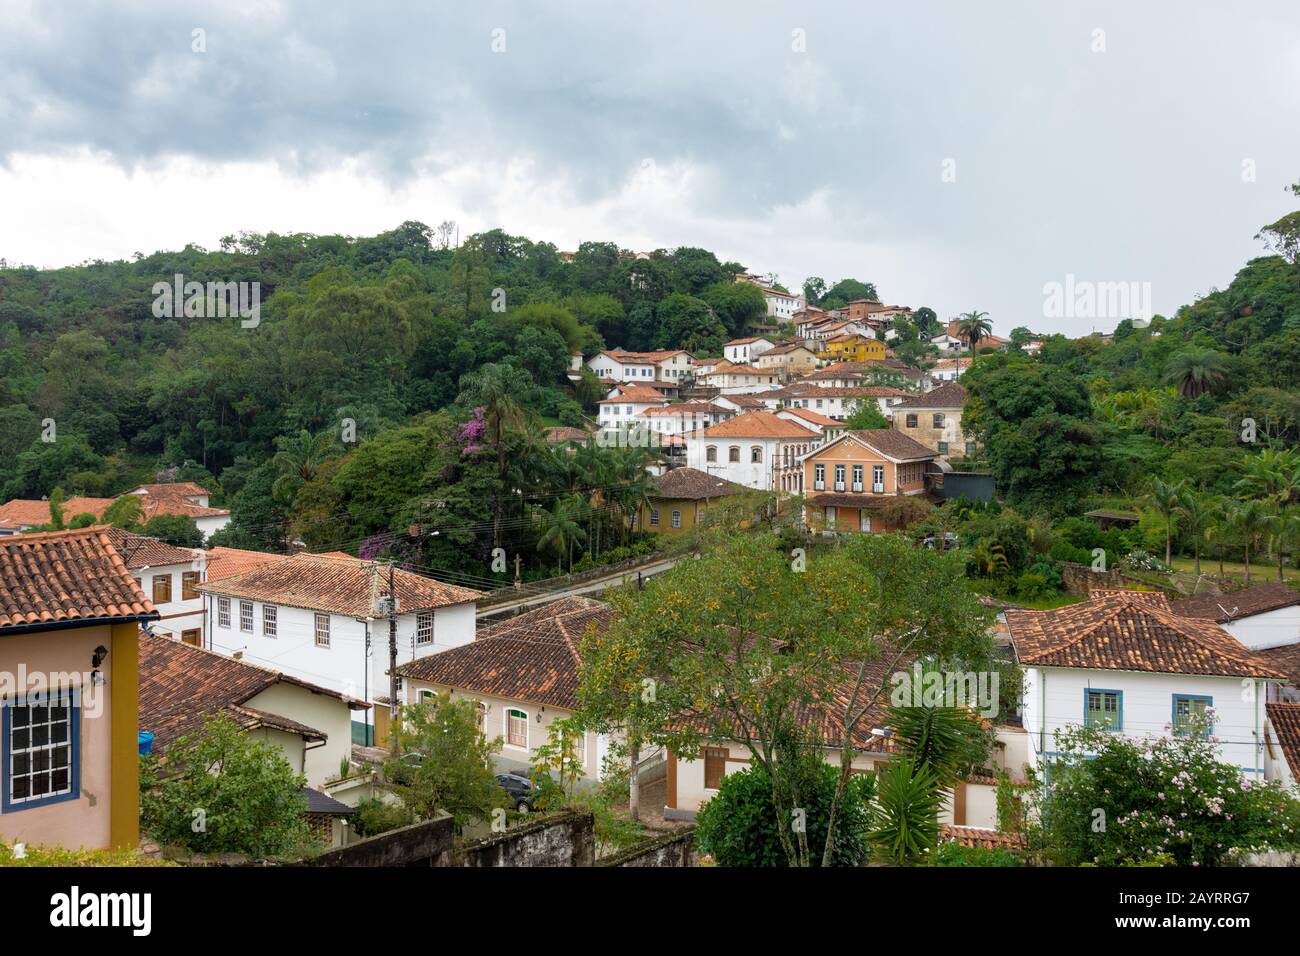 OURO PRETO, MINAS GERAIS, BRAZIL - DECEMBER 22, 2019: Colonial style houses in the mountain with 'Agua Limpia' neightborhood in the background. Ouro P Stock Photo